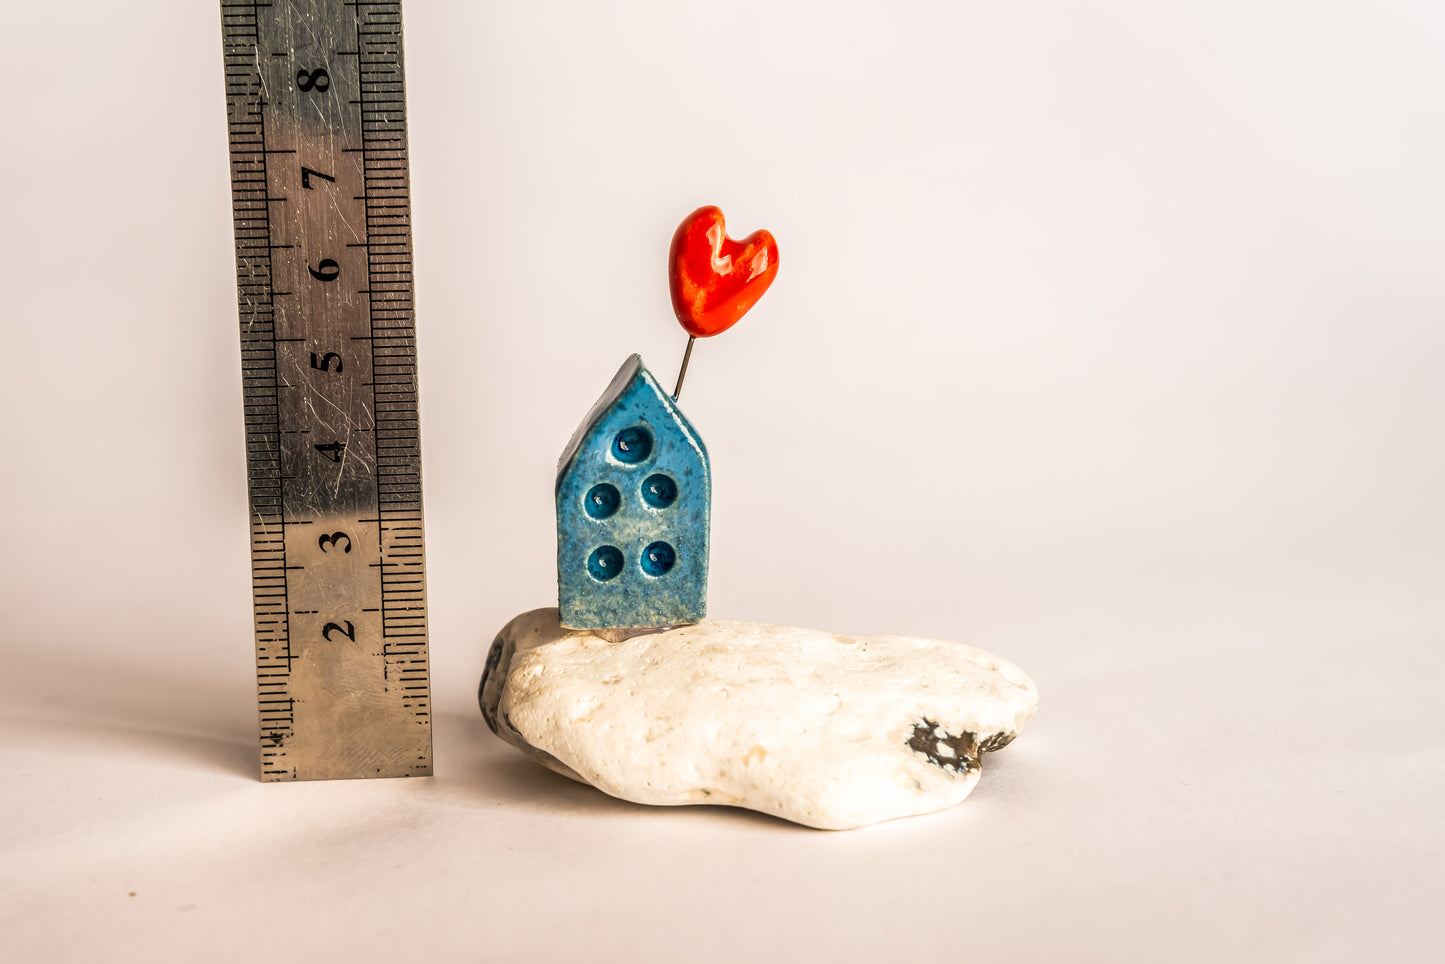 Hand-built blue ceramic house on a rock, with a love heart